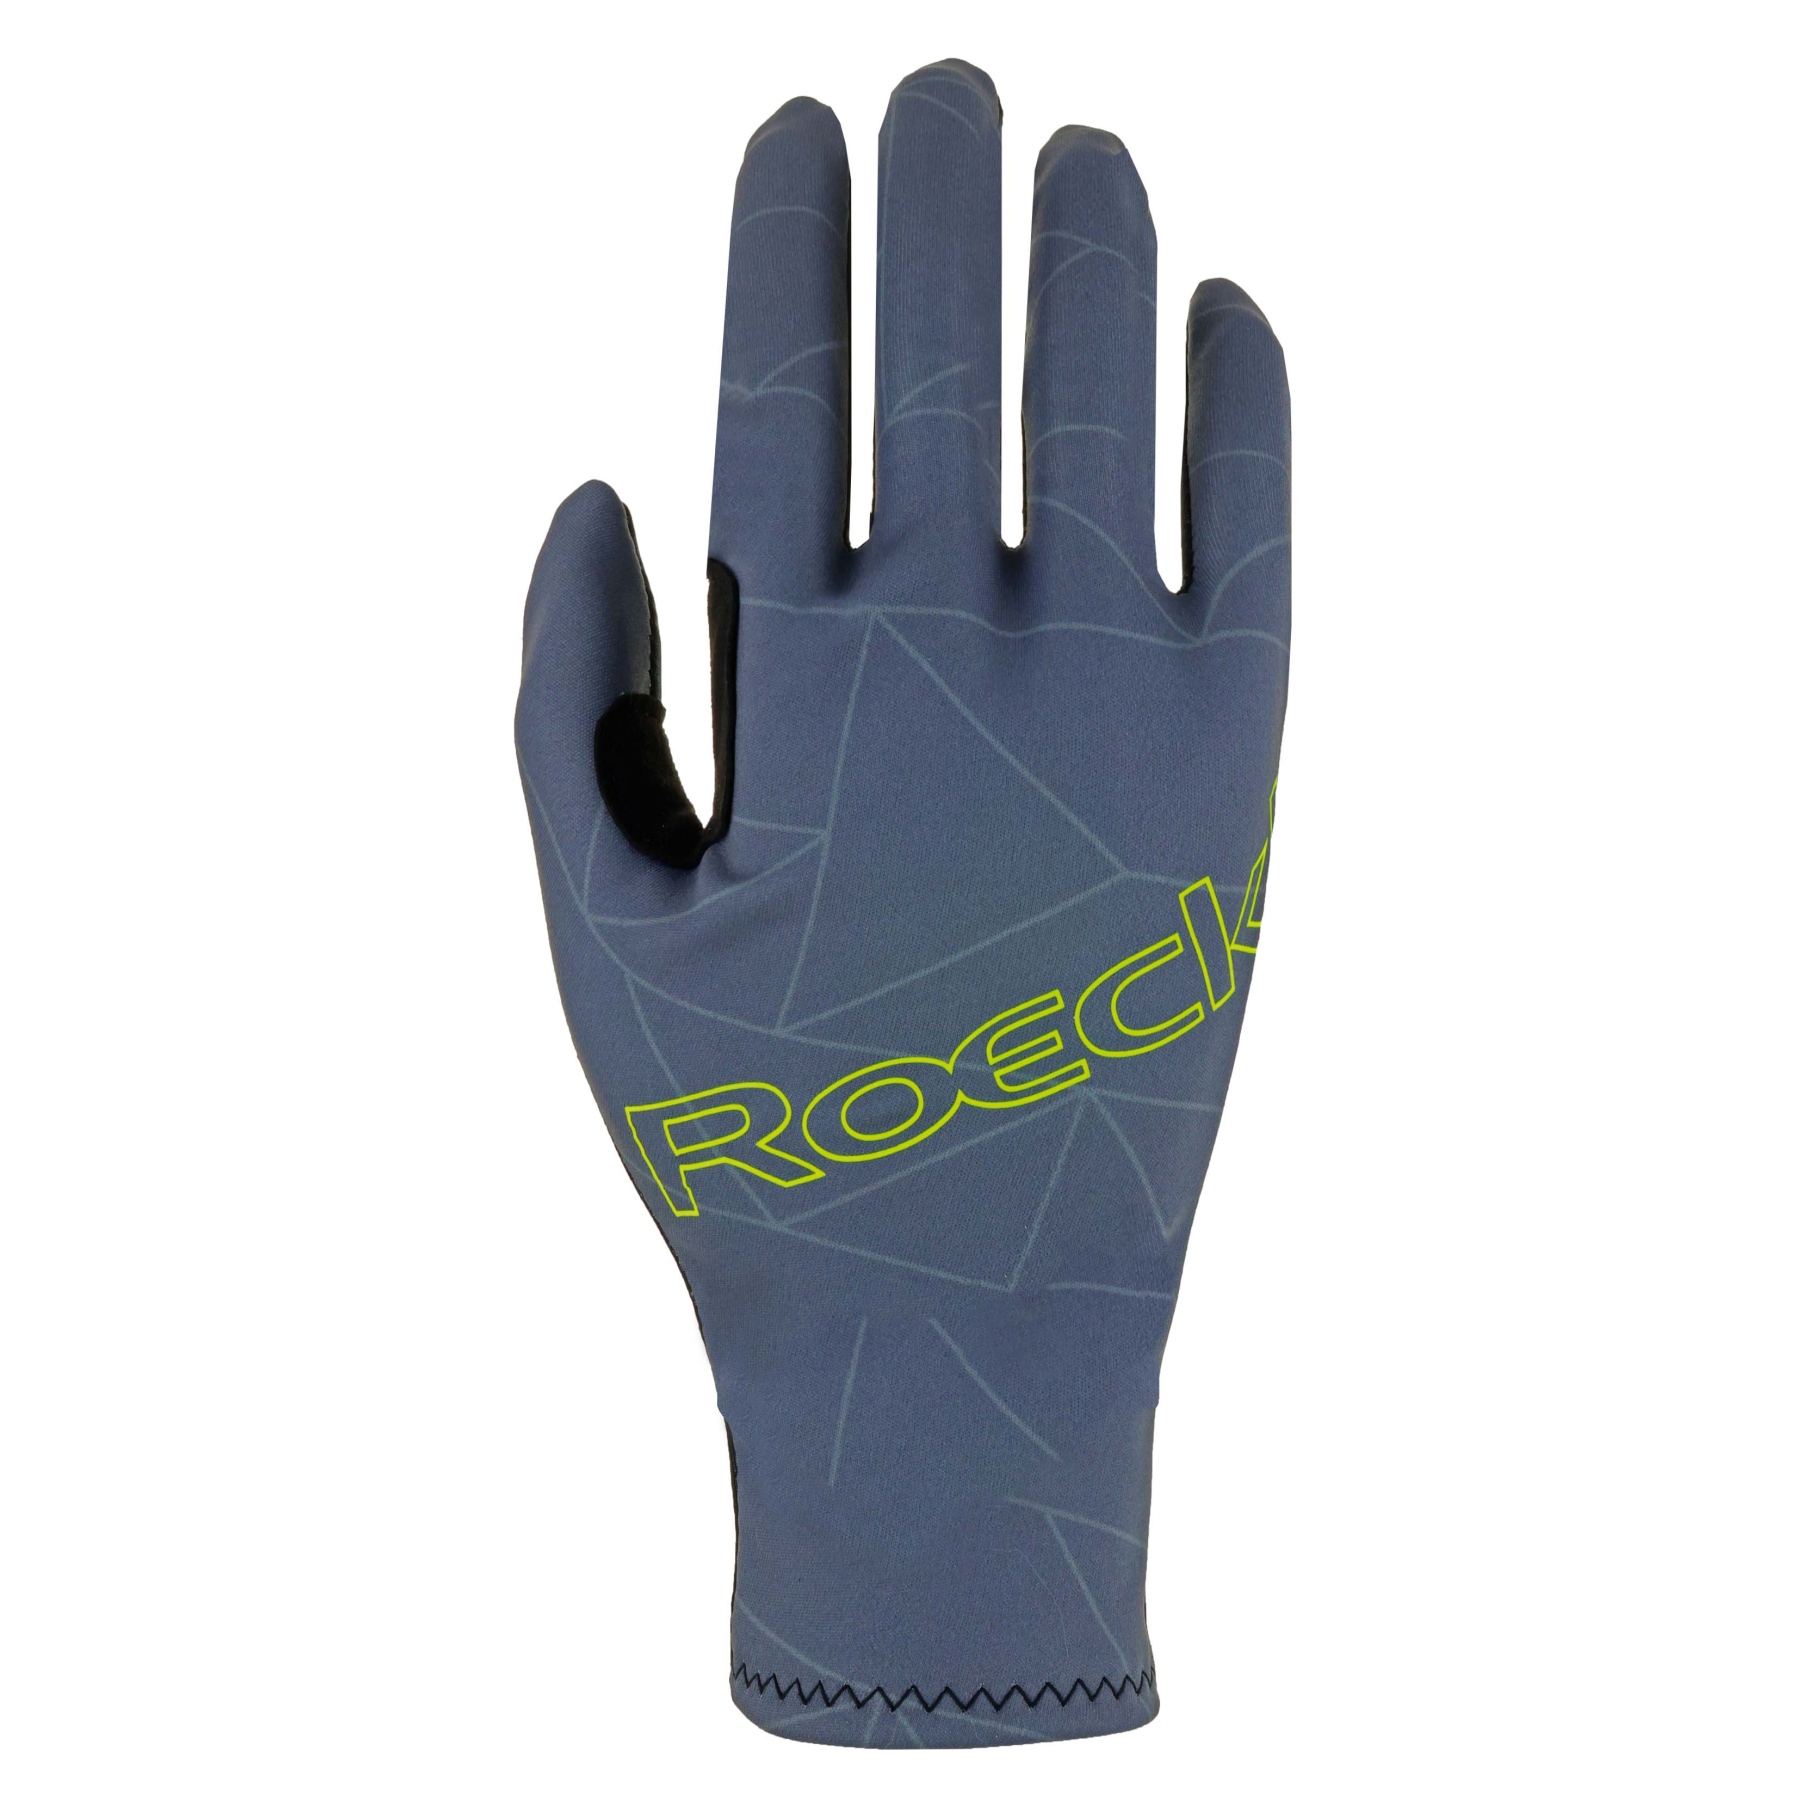 Picture of Roeckl Sports Raccano Cycling Gloves - steel grey 8420